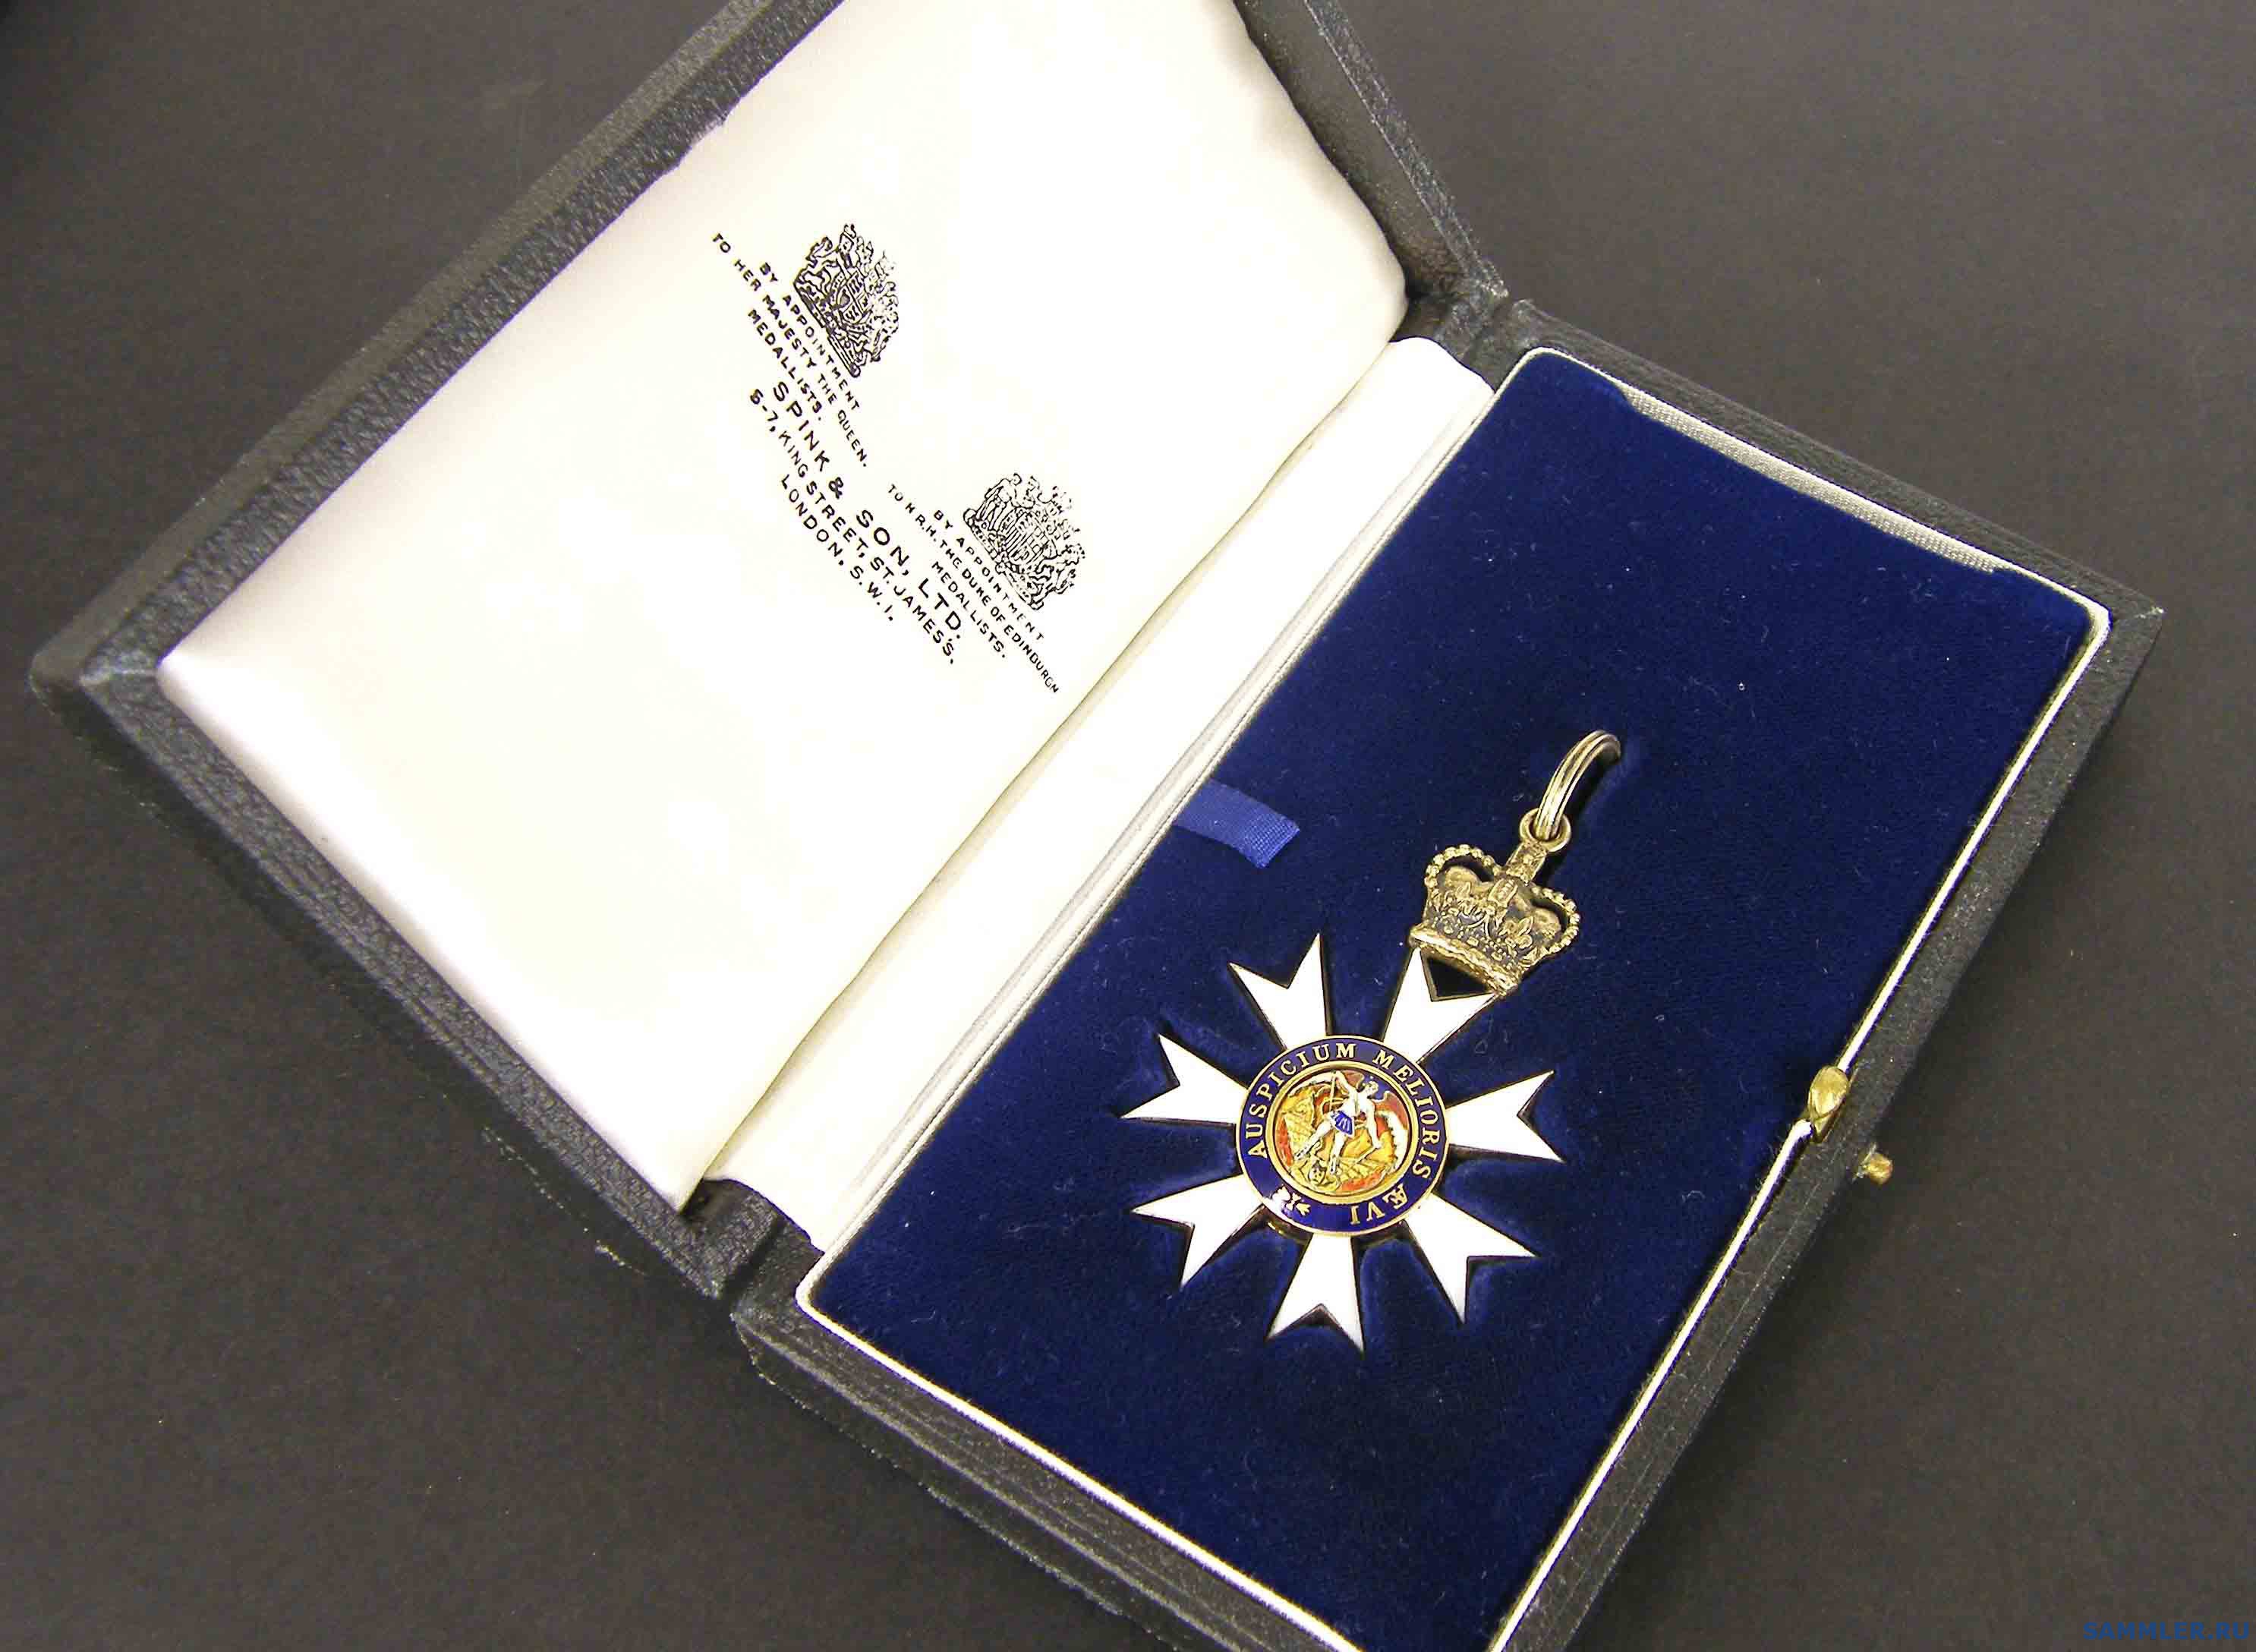 Most_Distinguished_Order_of_Saint_Michael_and_Saint_George_Spink___Son_19th_February_1987.jpg